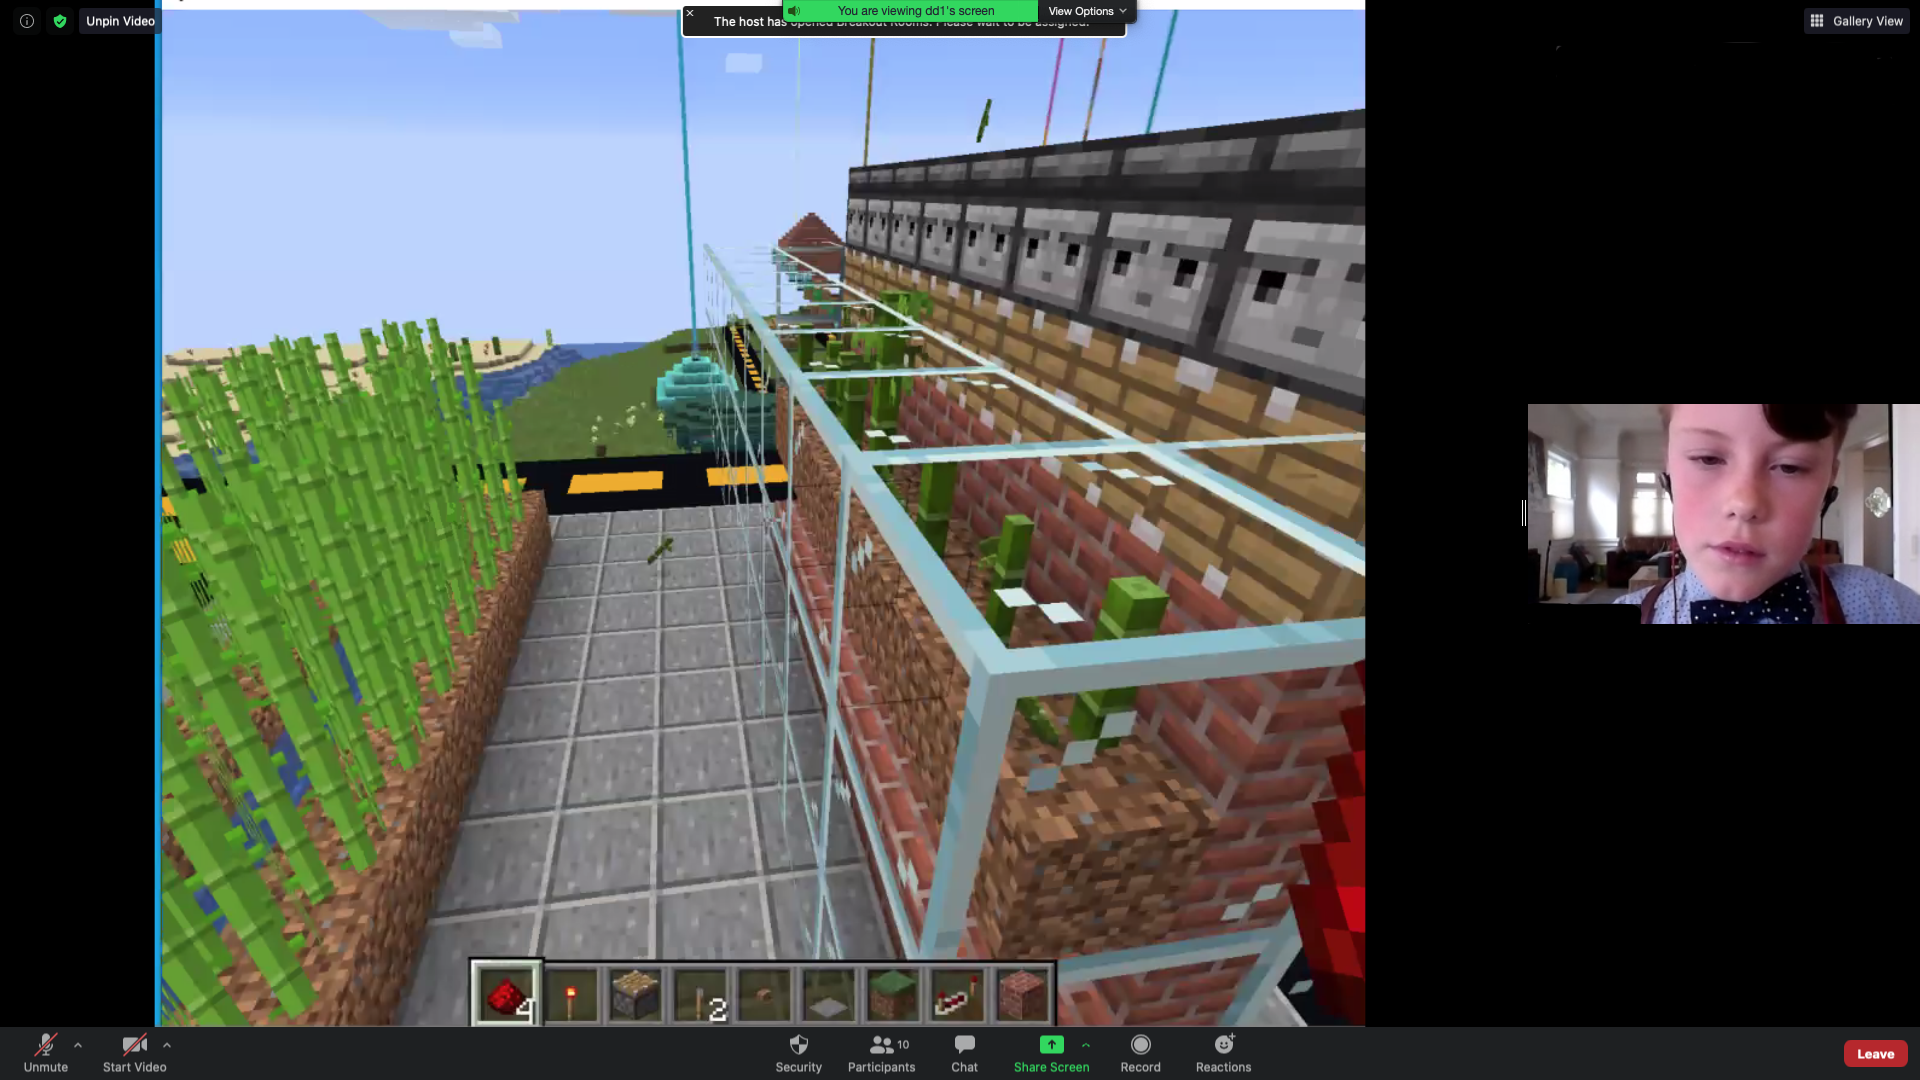 Kids learn to build with redstone in Minecraft virtual camp